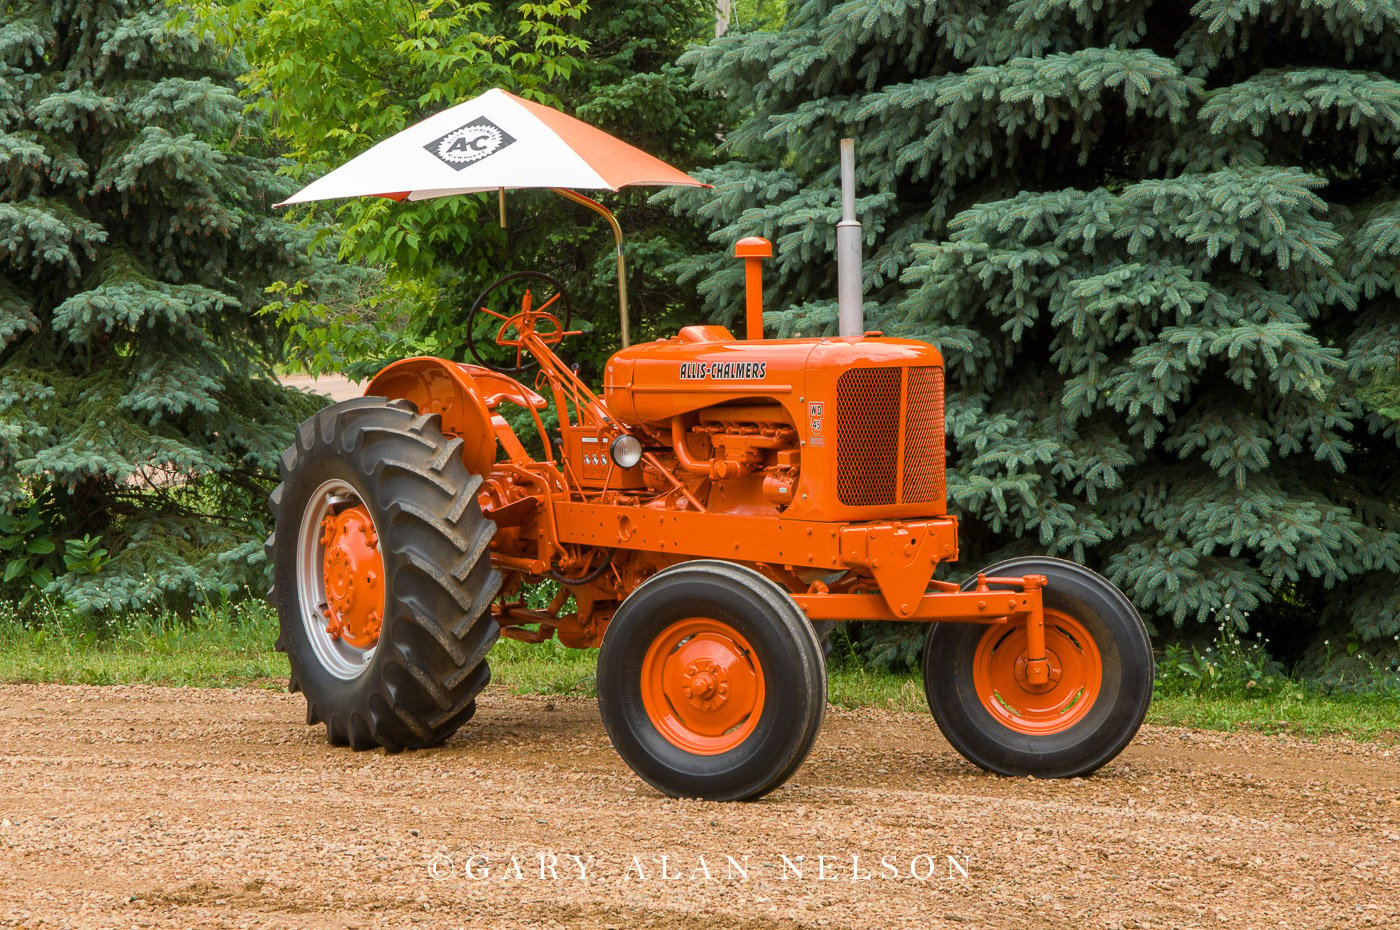 Allis Chalmers WD 45 Diesel. AT 07 67 AC. Gary Alan Nelson Photography